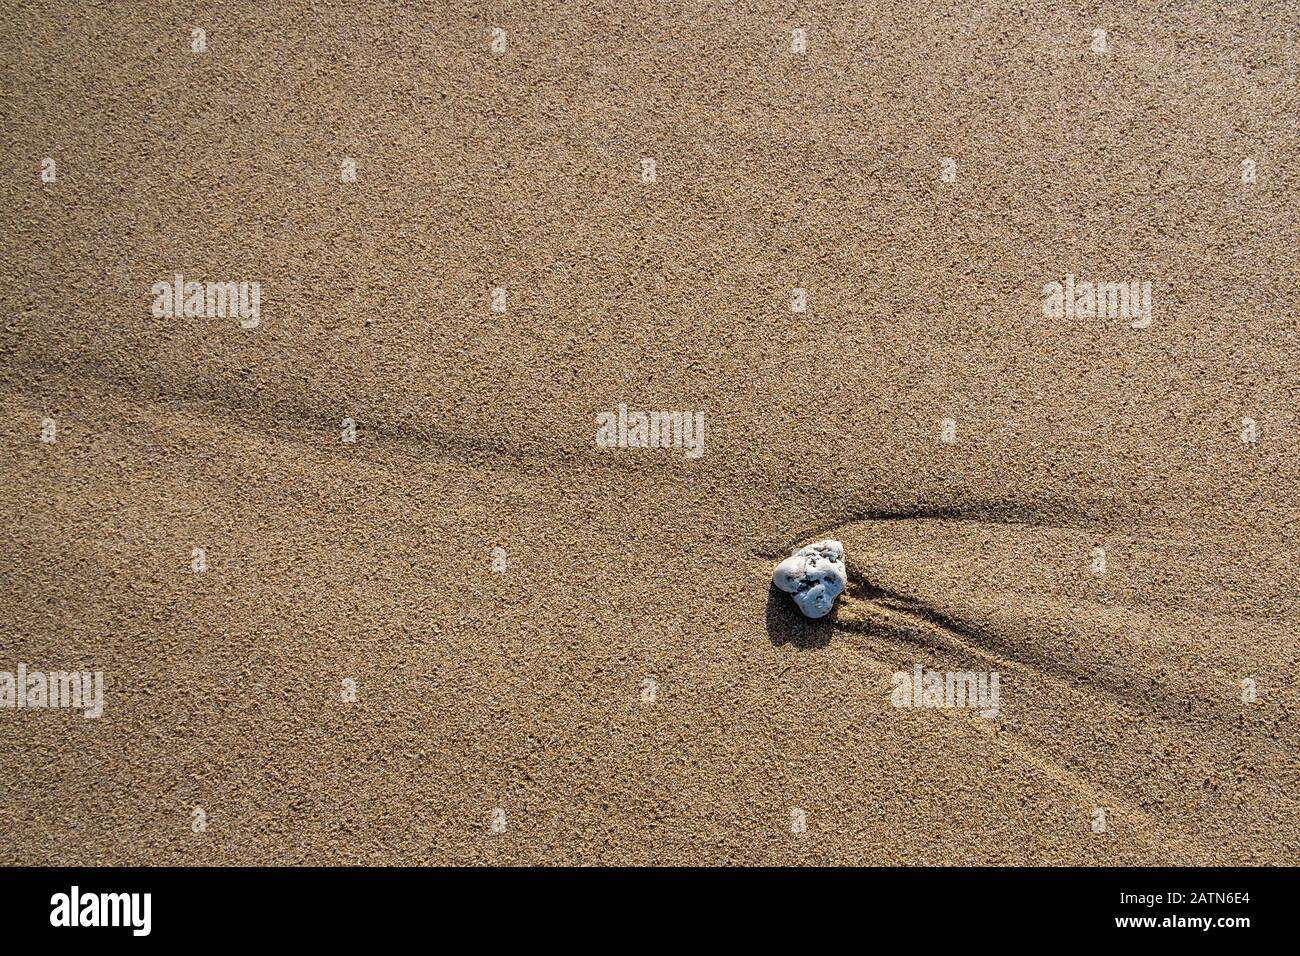 A stone on a sandy beach at low tide. Stock Photo